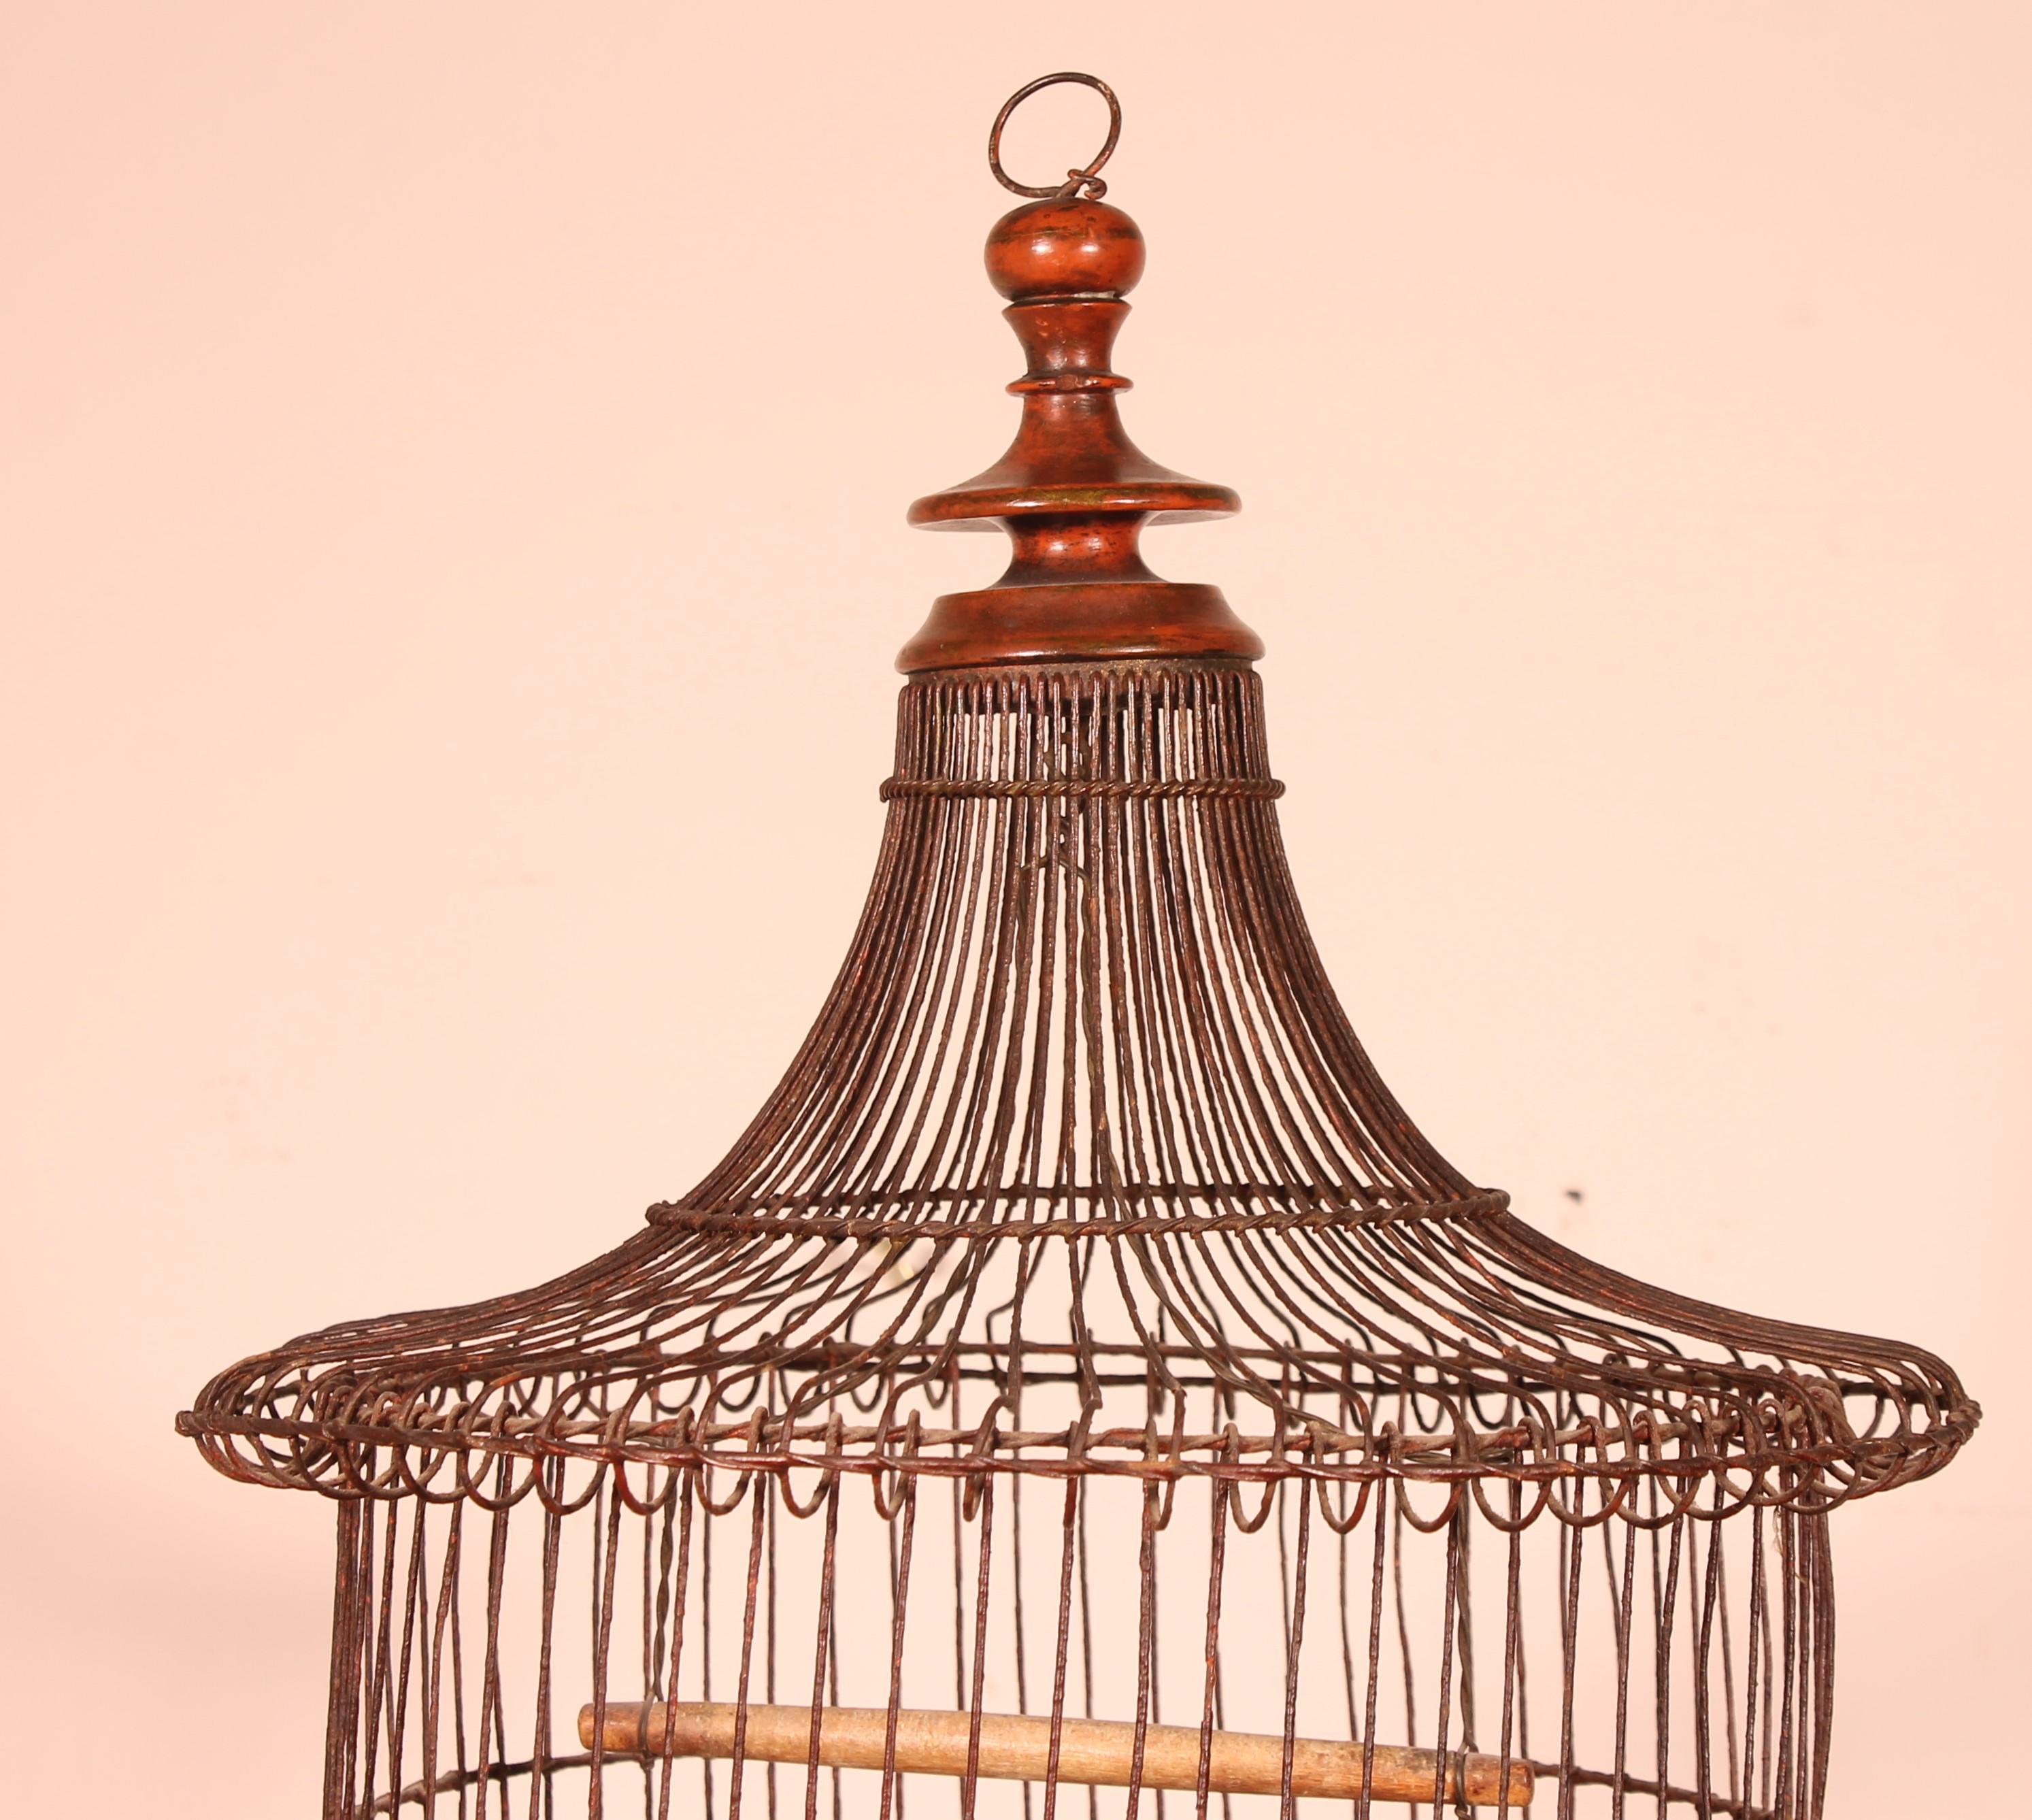 Giltwood Bird Cage on Stand with Chinese Decor, 19 ° Century For Sale